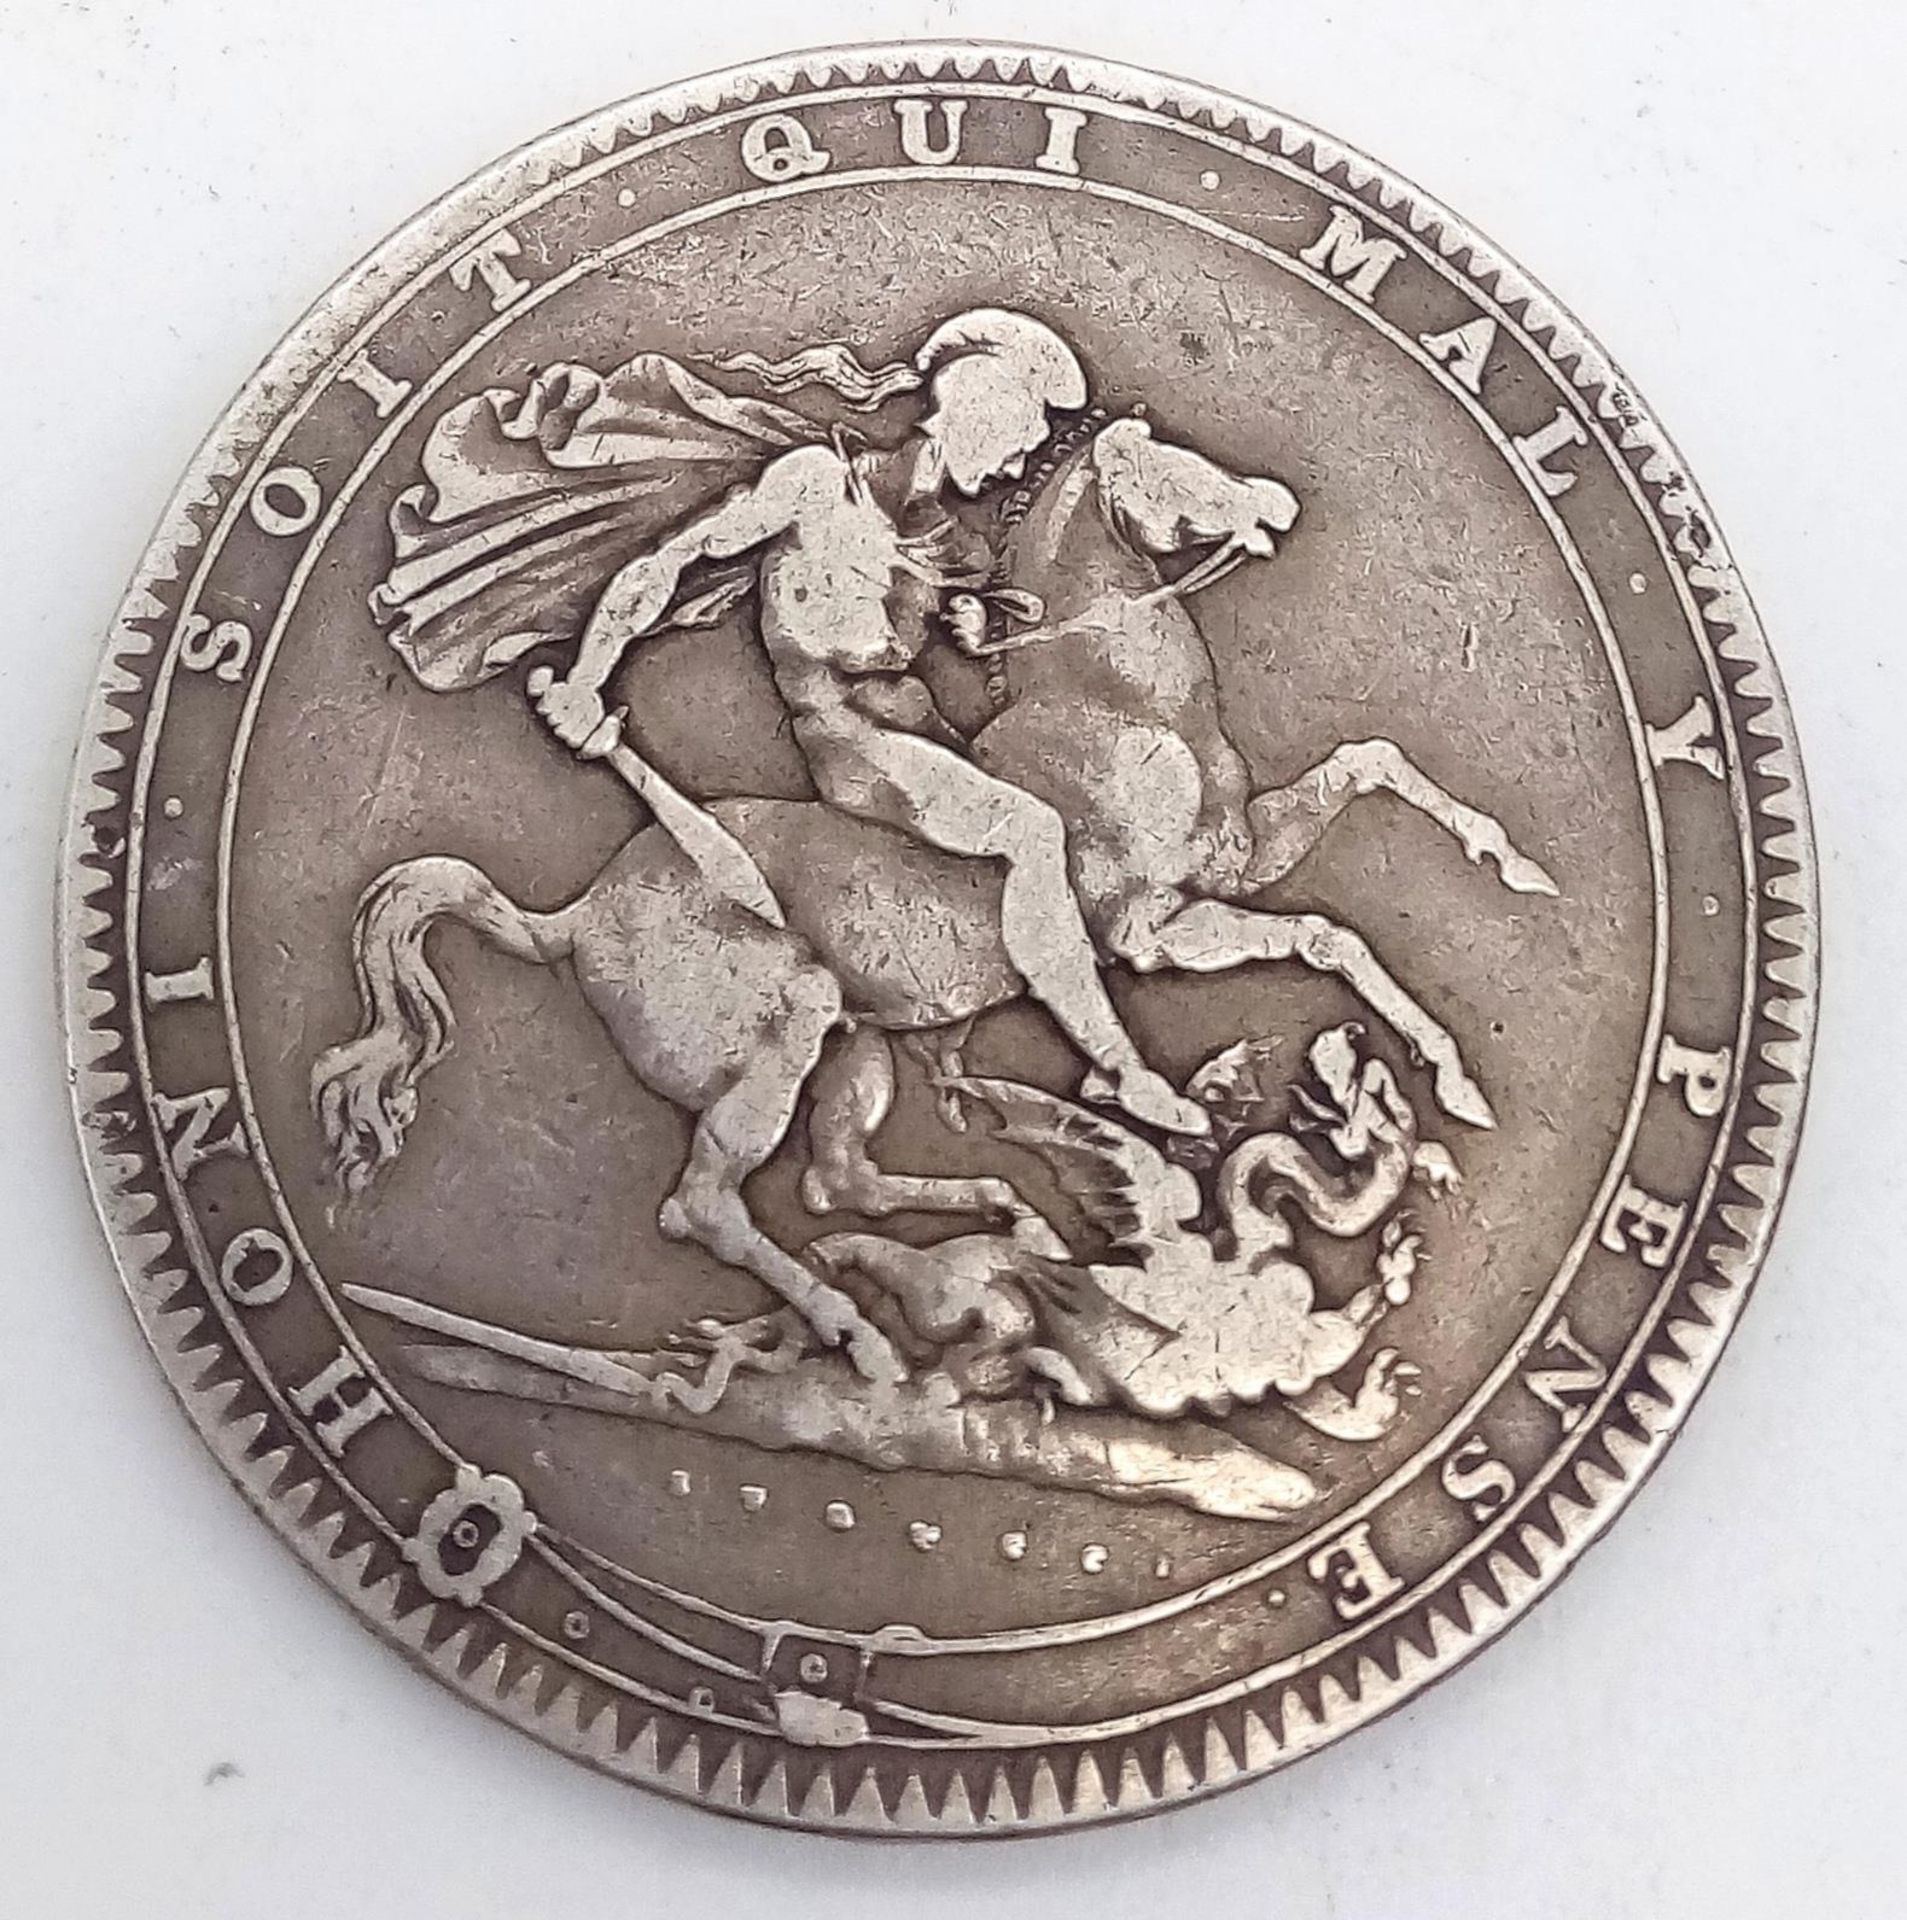 A GEORGE III SILVER CROWN 1820 WITH GEORGE SLAYING THE DRAGON ON THE REVERSE SIDE . - Image 2 of 3